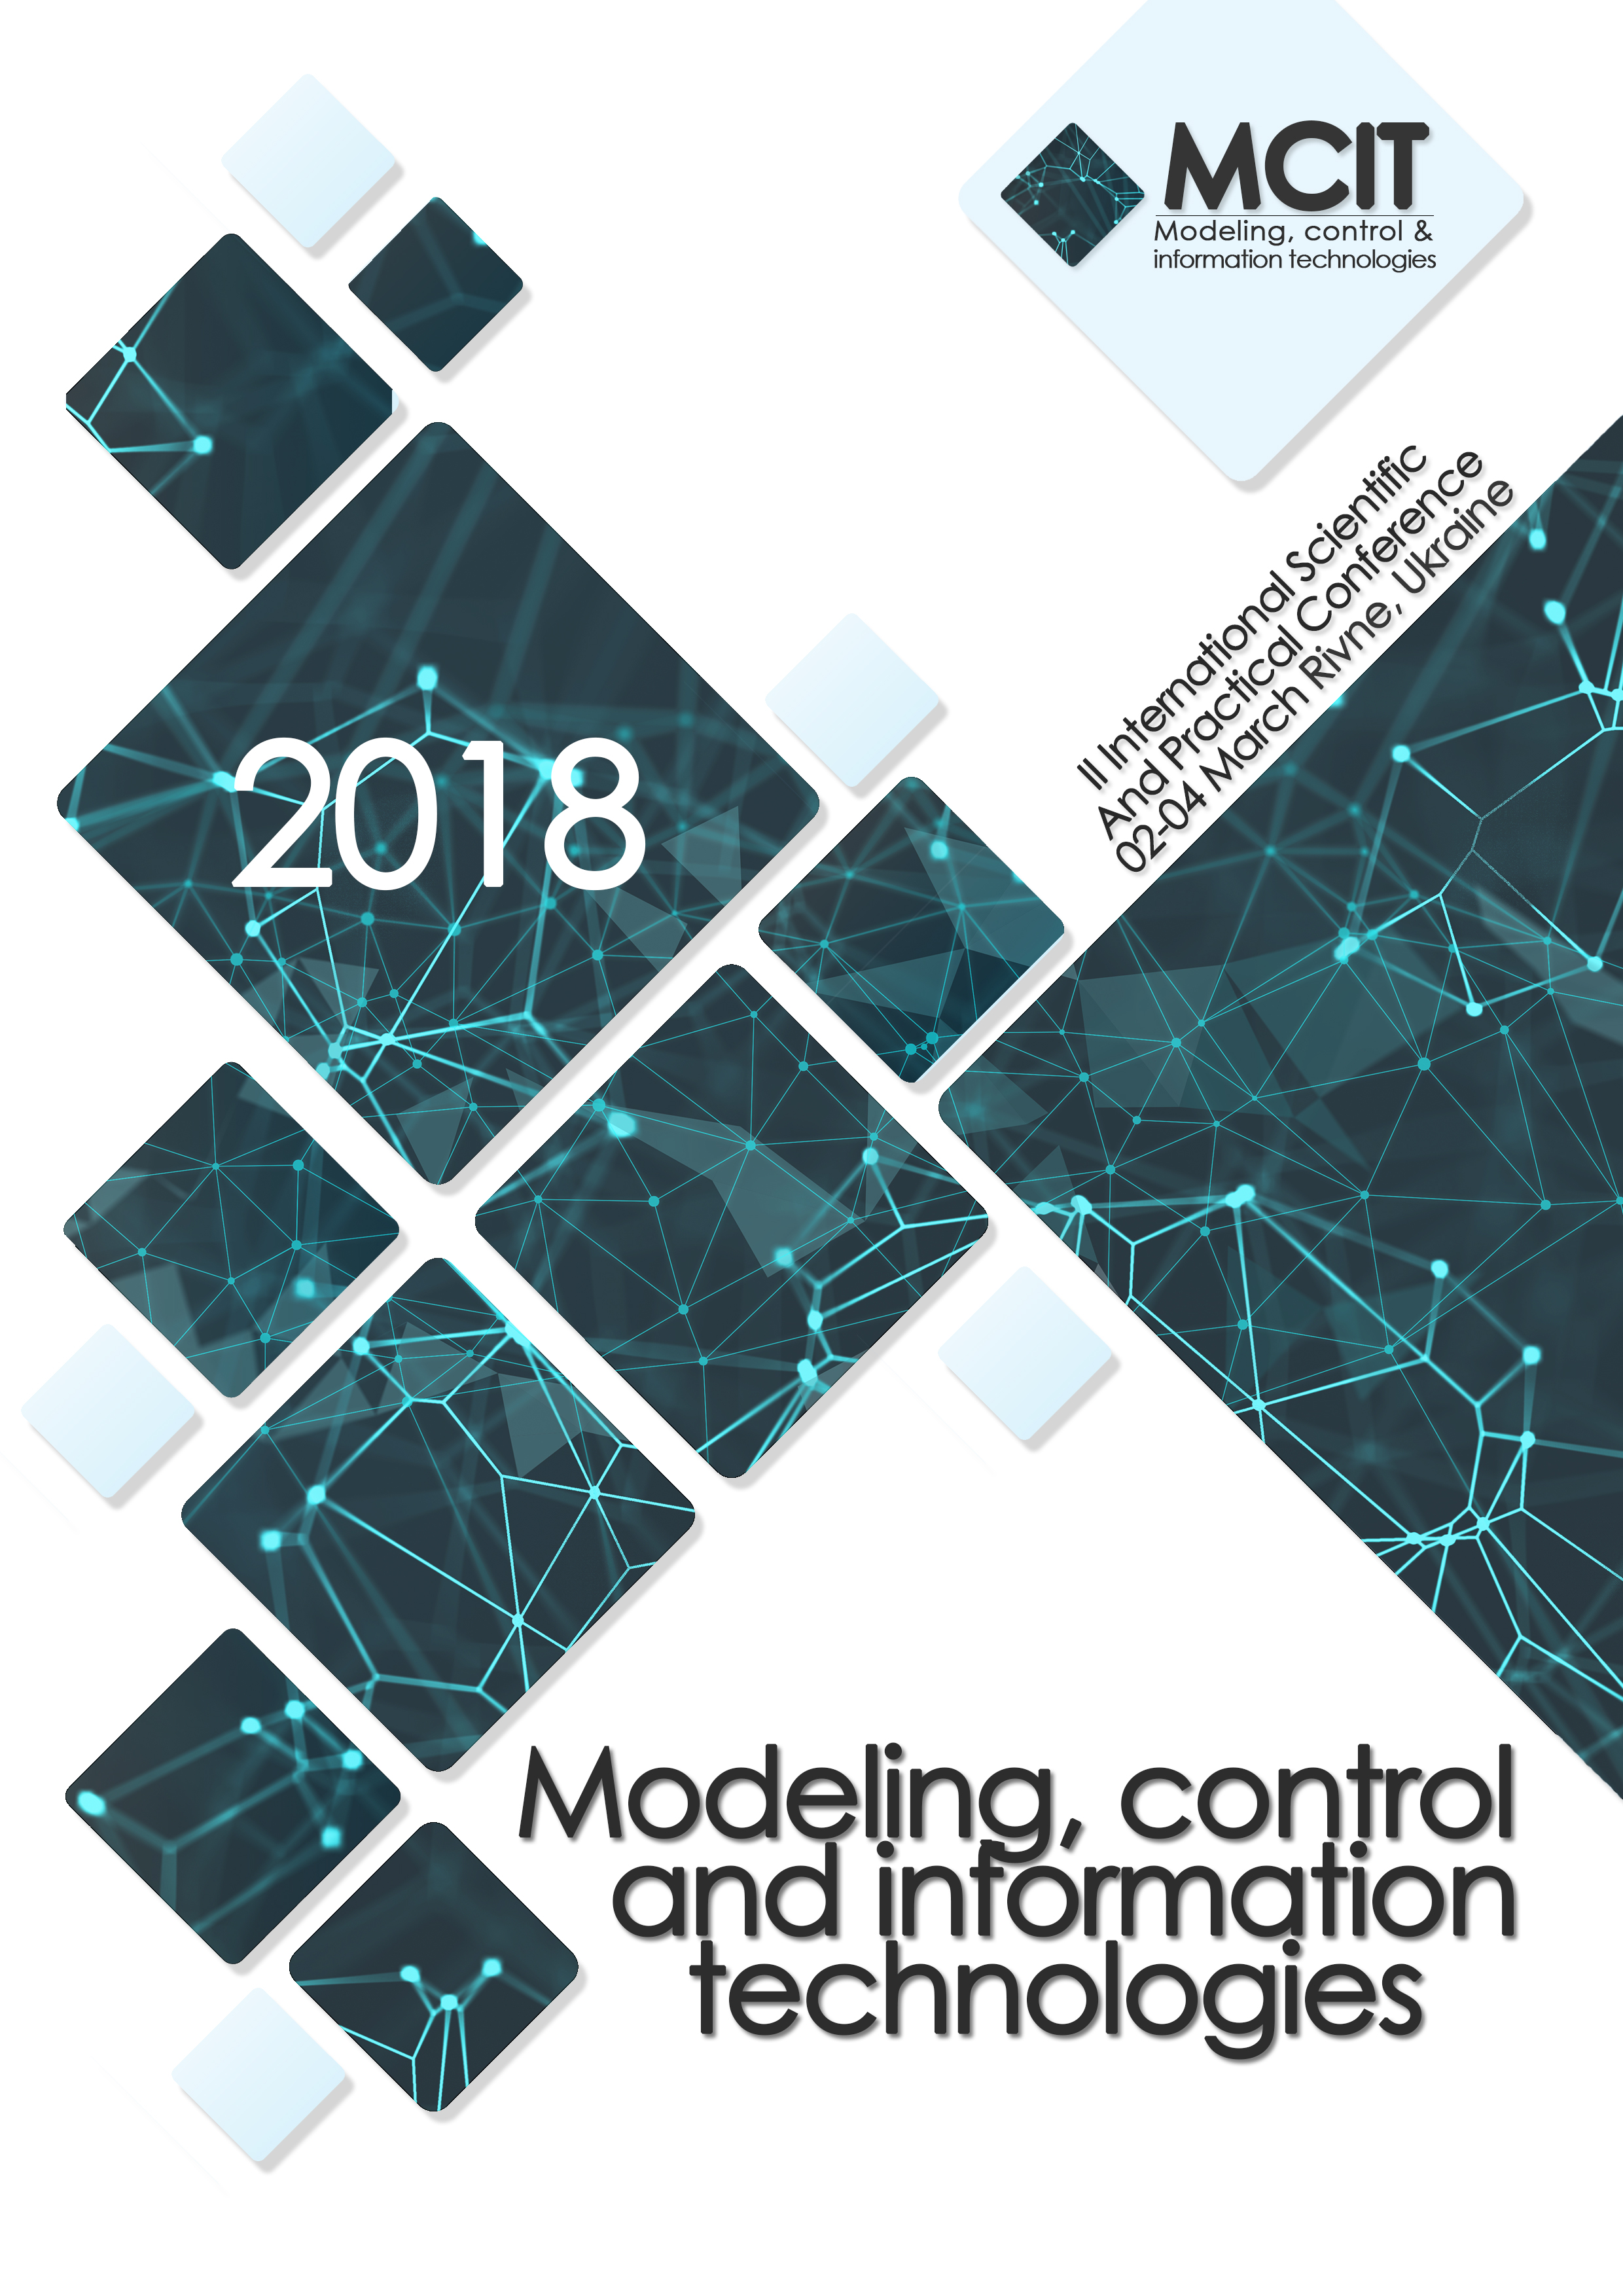 					View No. 2 (2018): Modeling, control and information technologies
				